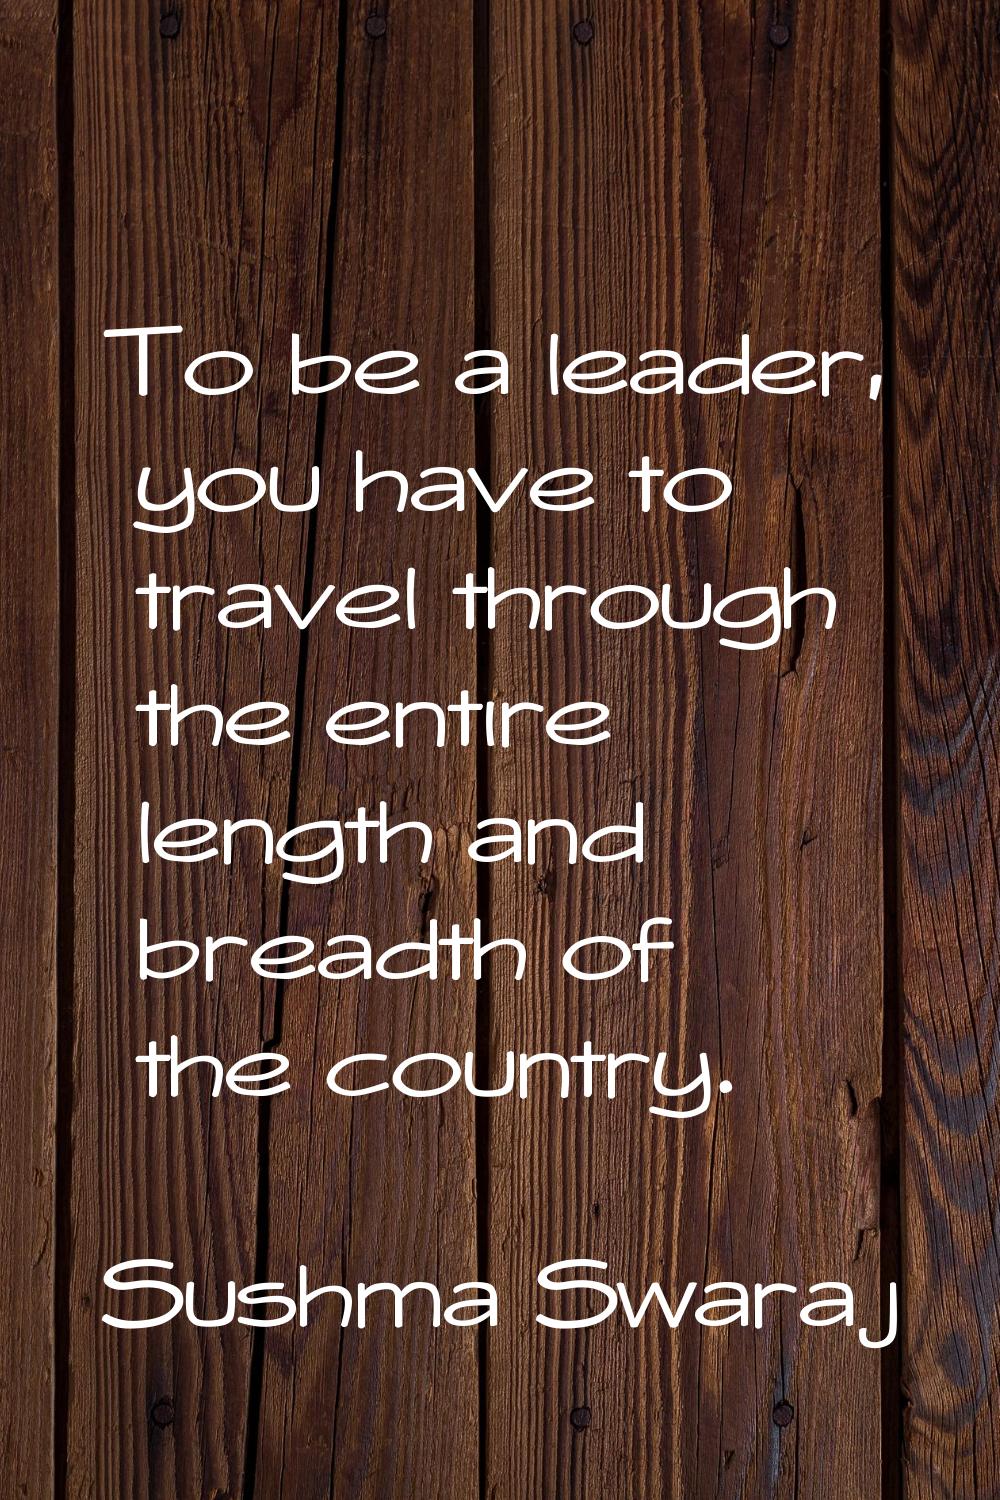 To be a leader, you have to travel through the entire length and breadth of the country.